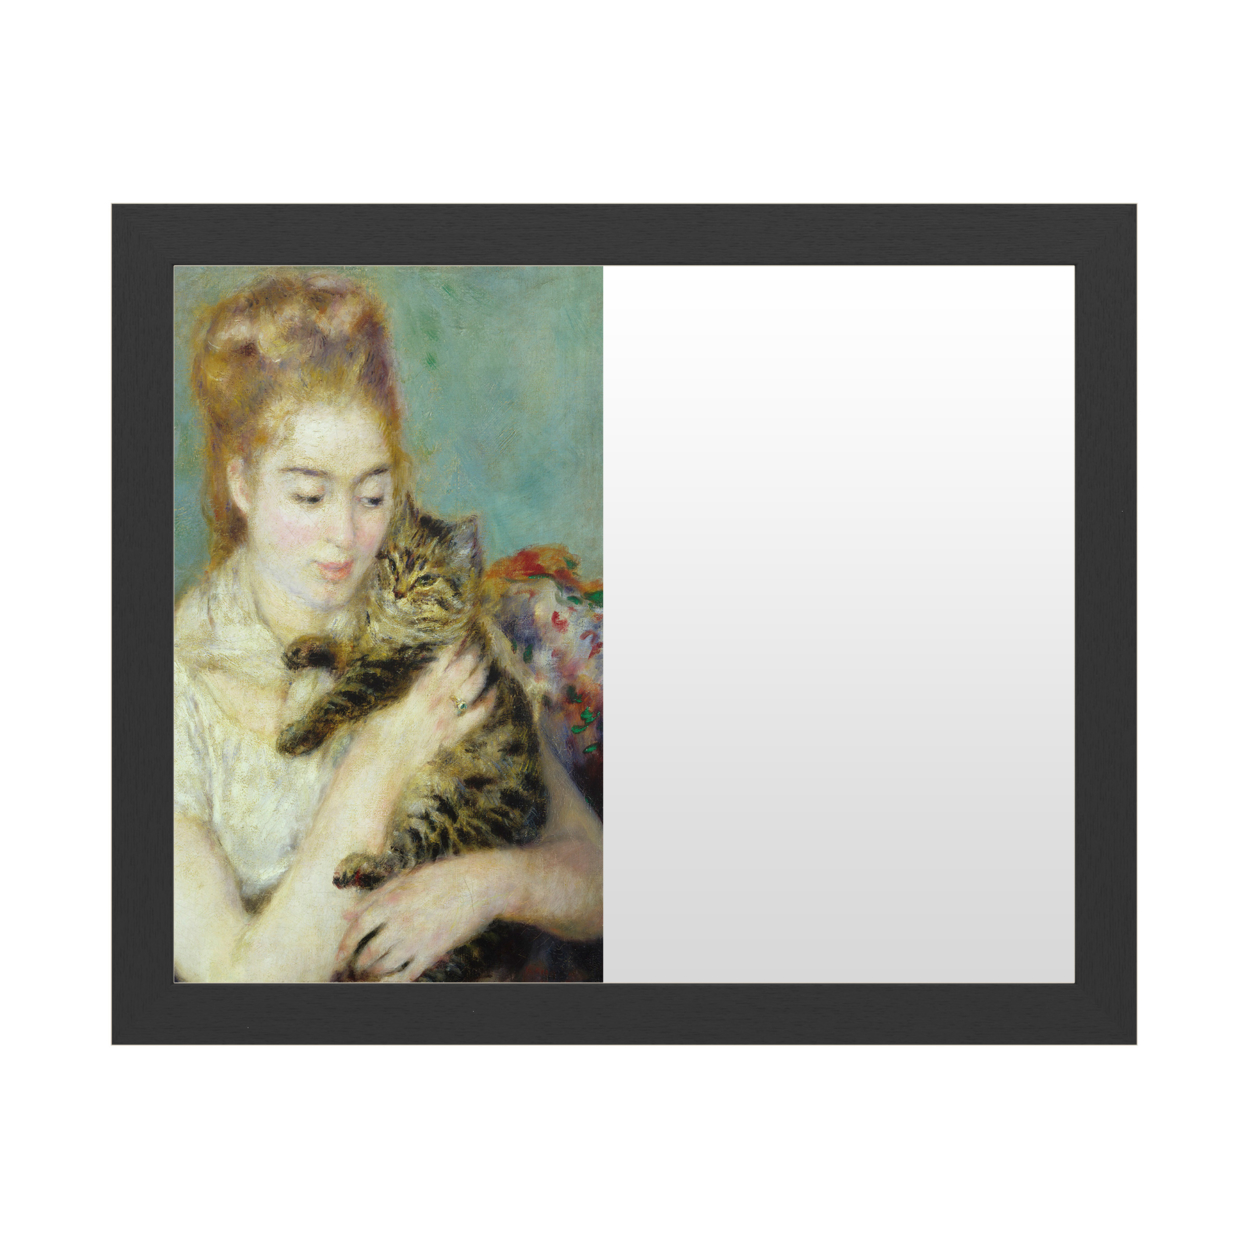 Dry Erase 16 X 20 Marker Board With Printed Artwork - Pierre Renoir Woman With A Cat 1875 White Board - Ready To Hang